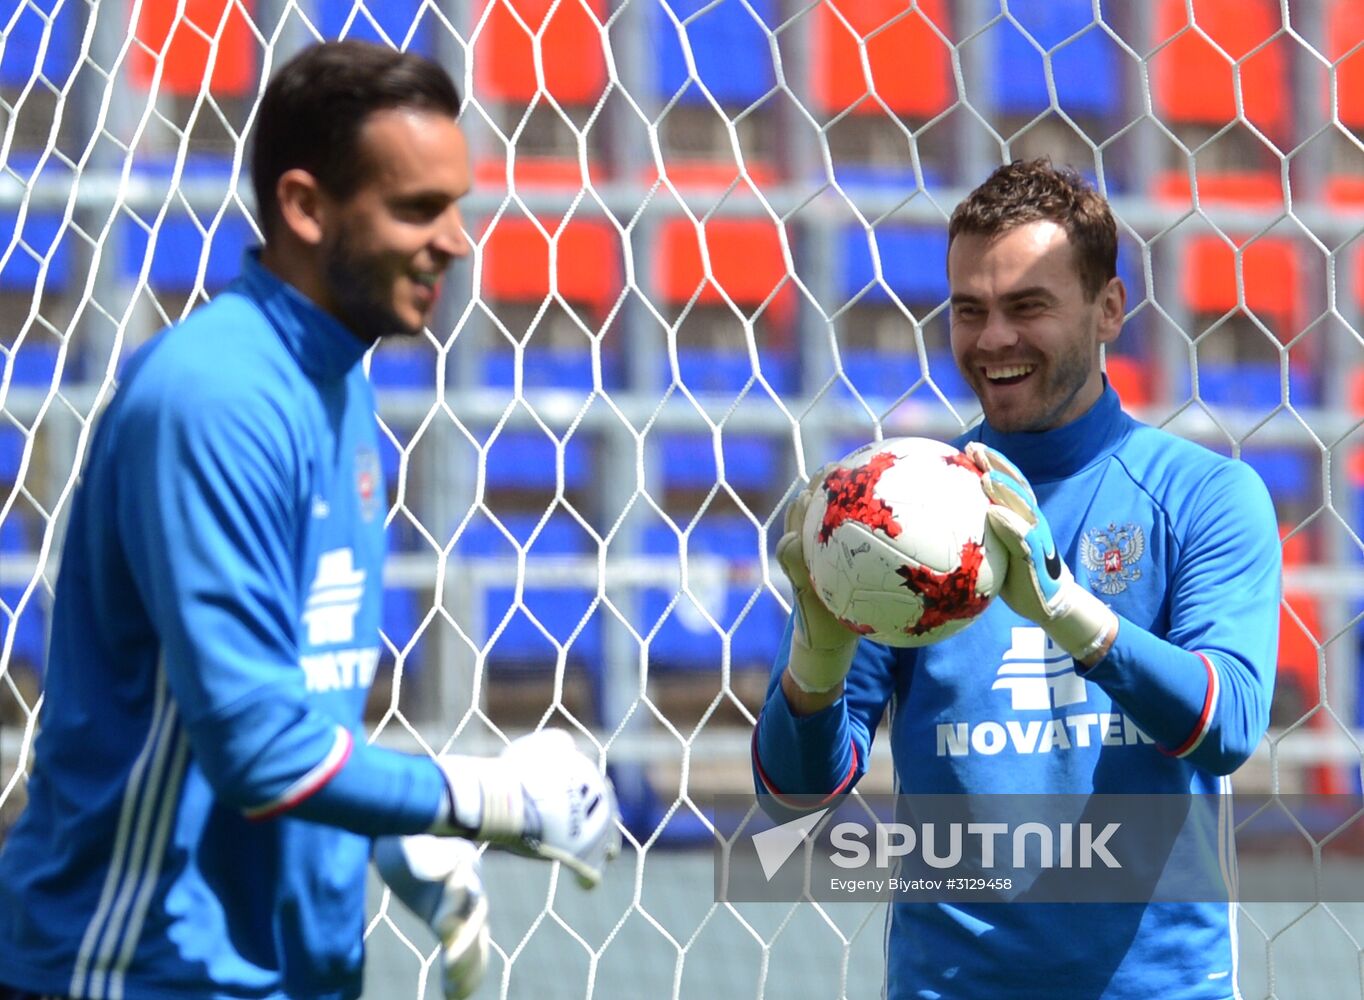 Football. Russian national team's training session